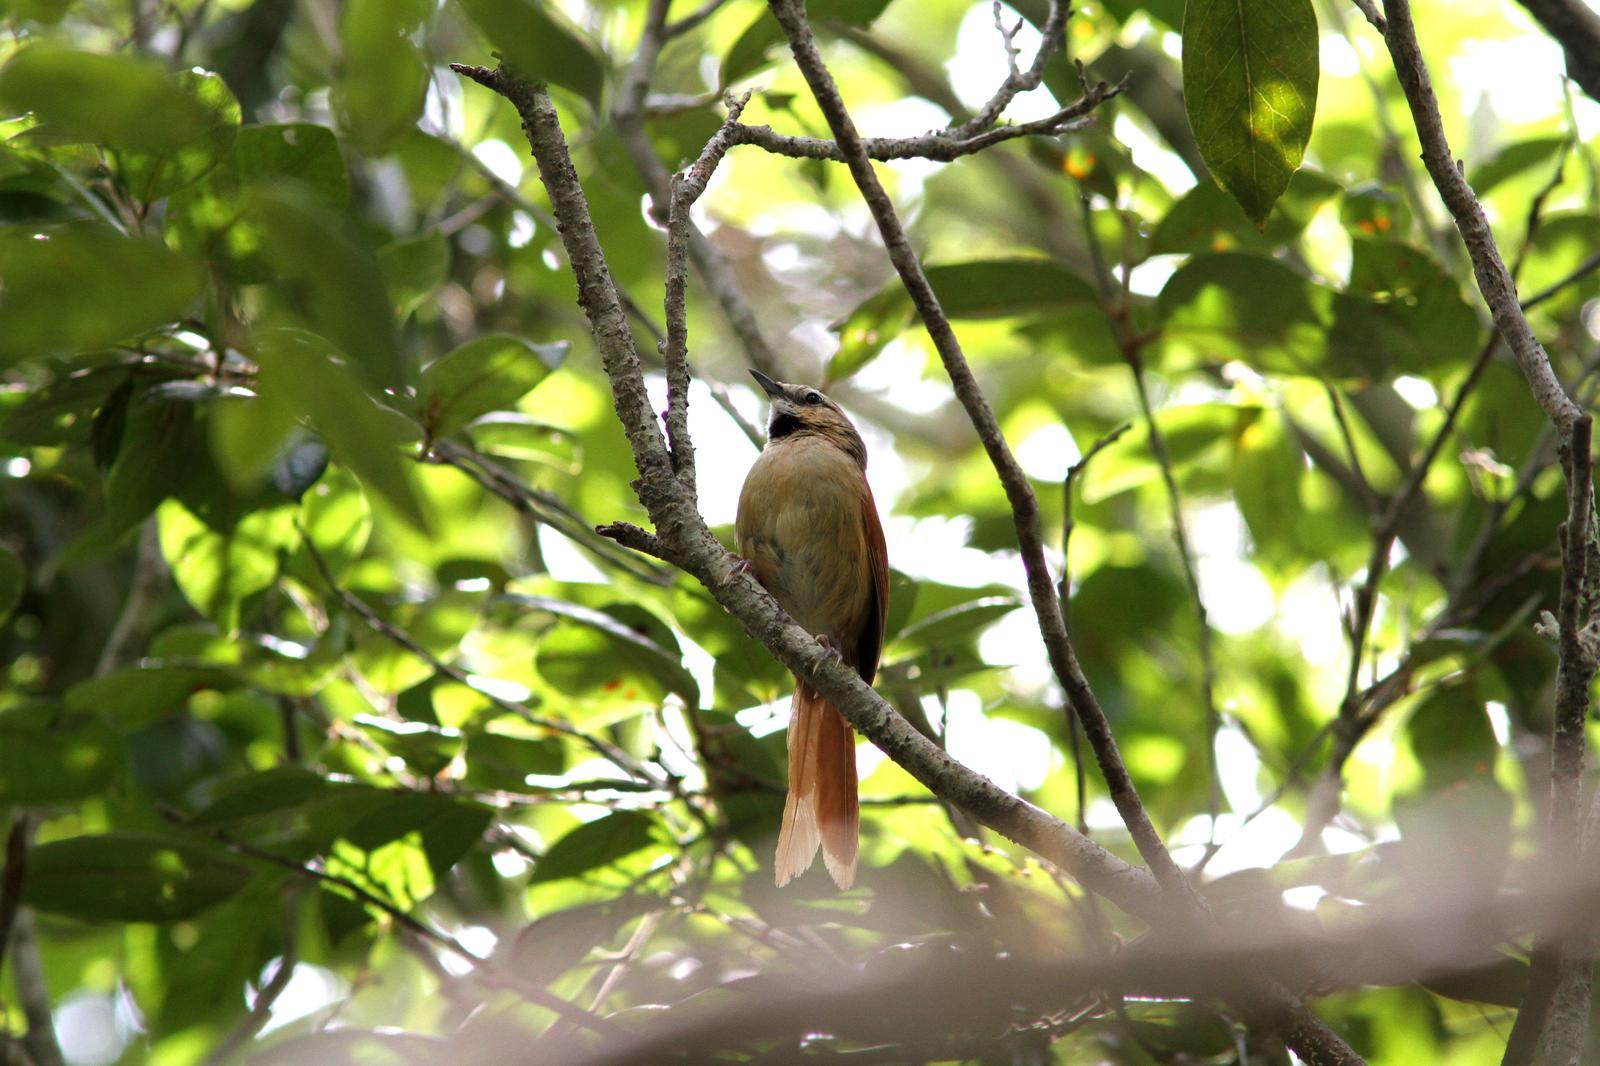 Ochre-cheeked Spinetail Photo by Marcelo Padua